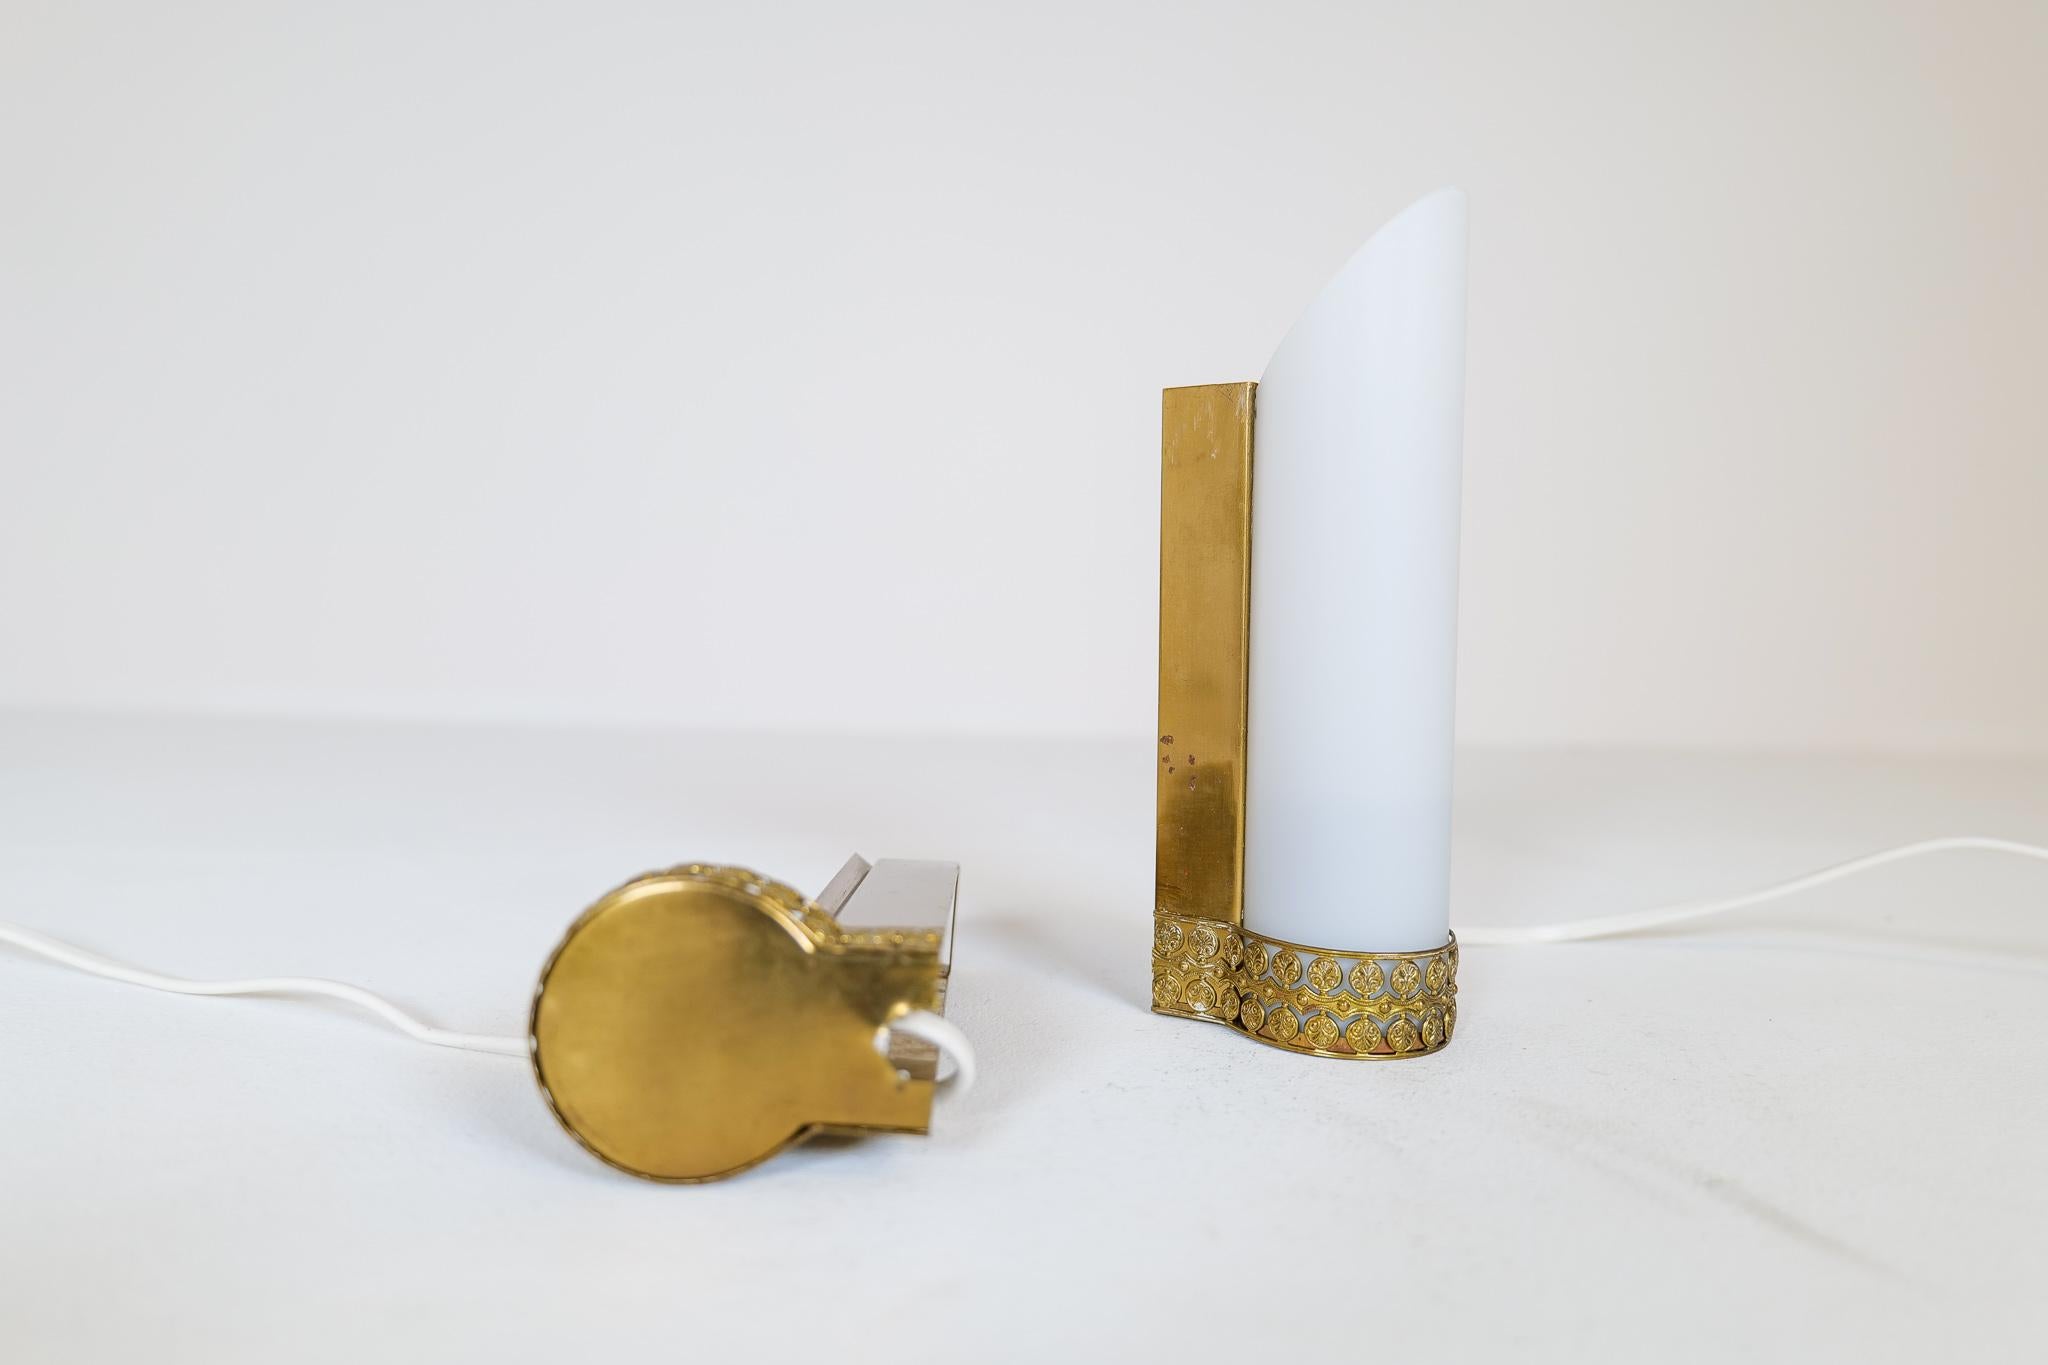 Midcentury Modern Pair of Brass and Opaline Wall Lamps Attributed to Asea Sweden For Sale 3